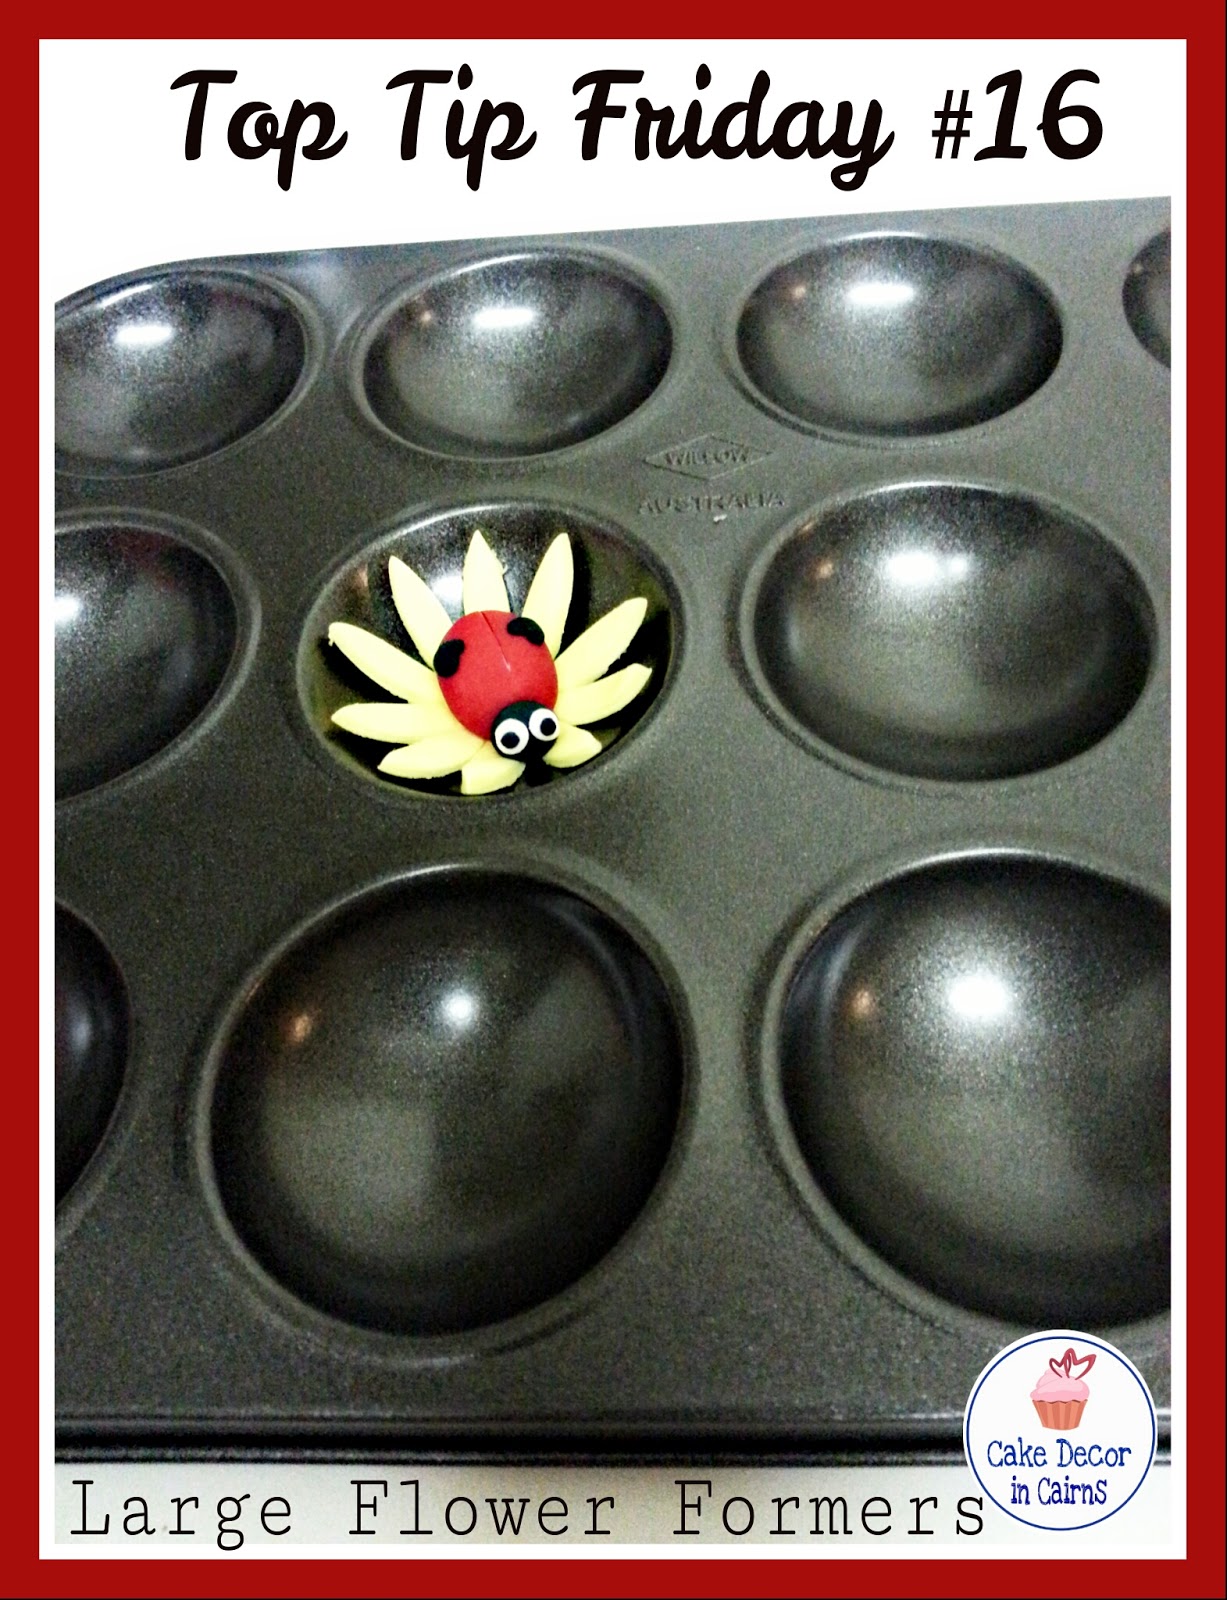 Using baking Trays as flower formers Cake Decor in Cairns Yellow Flower red lady bug Fondant